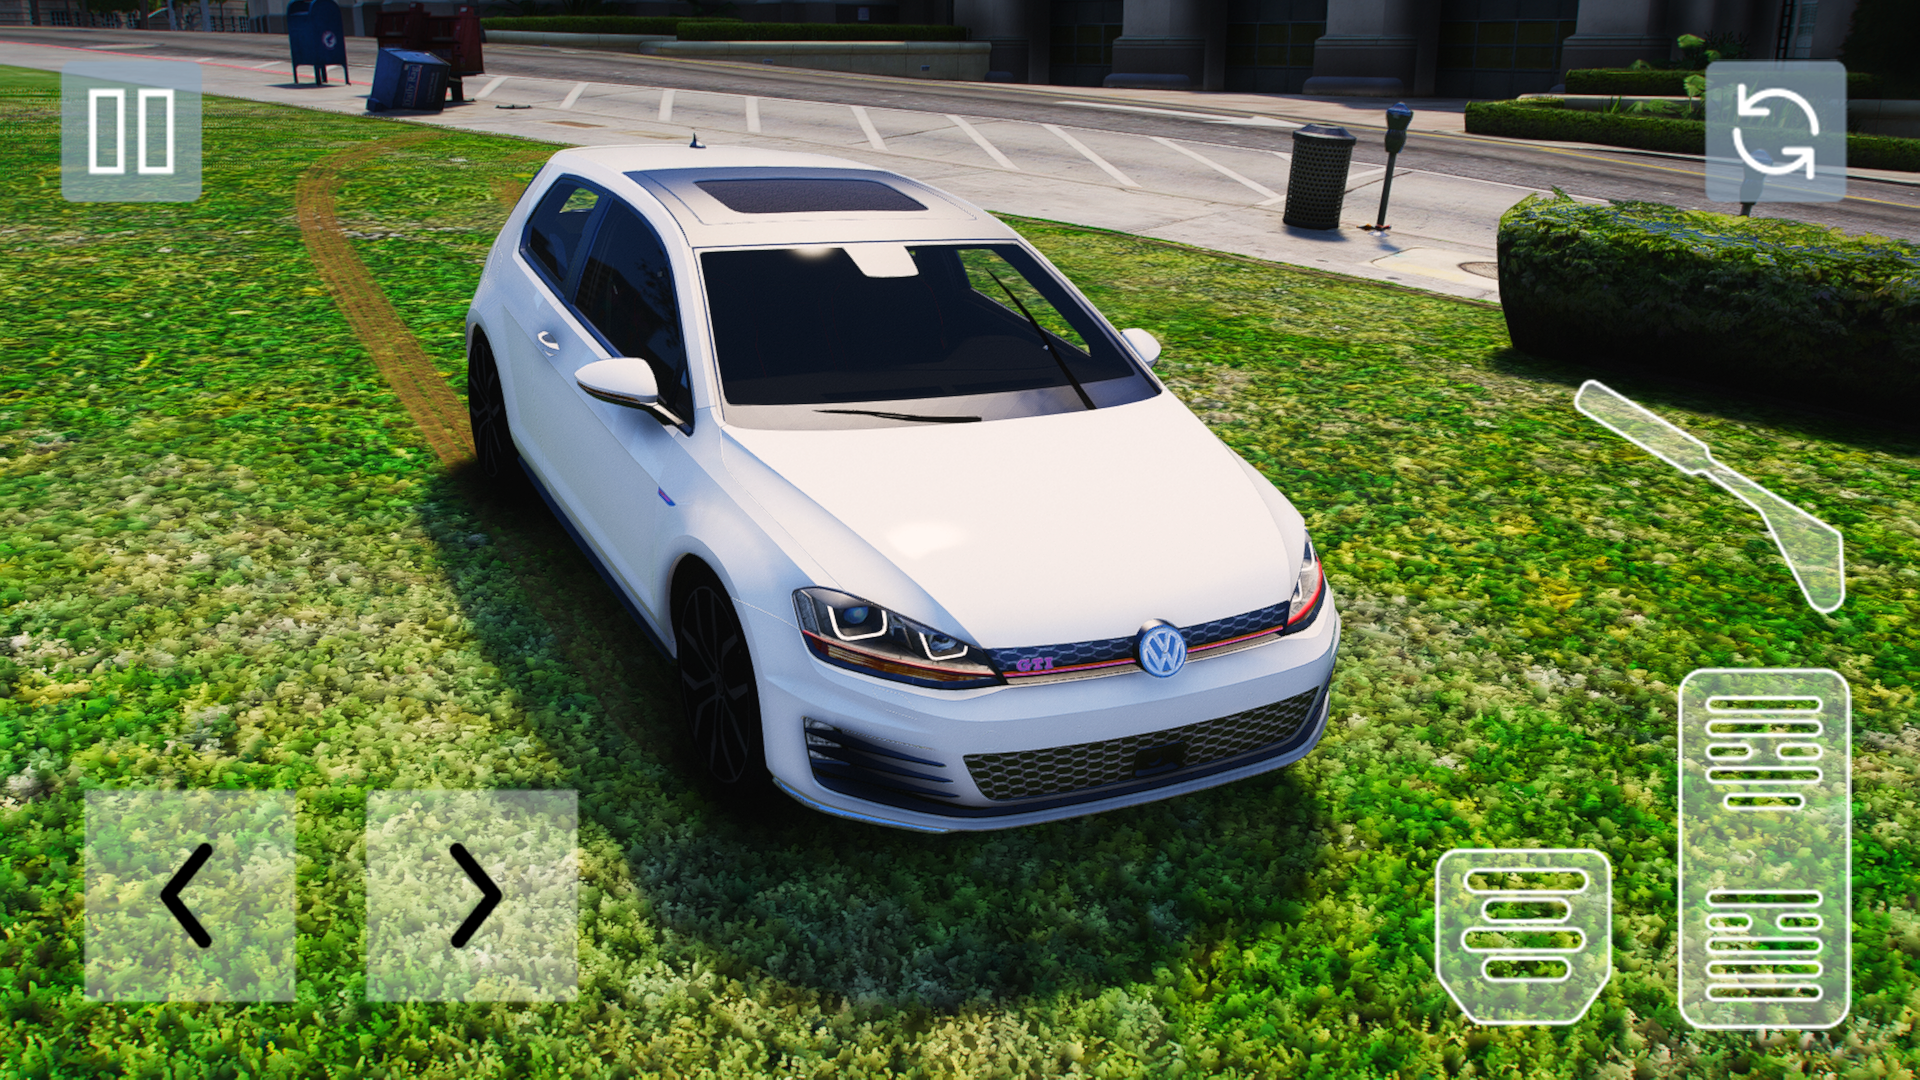 GTI Driving Simulator APK for Android Download